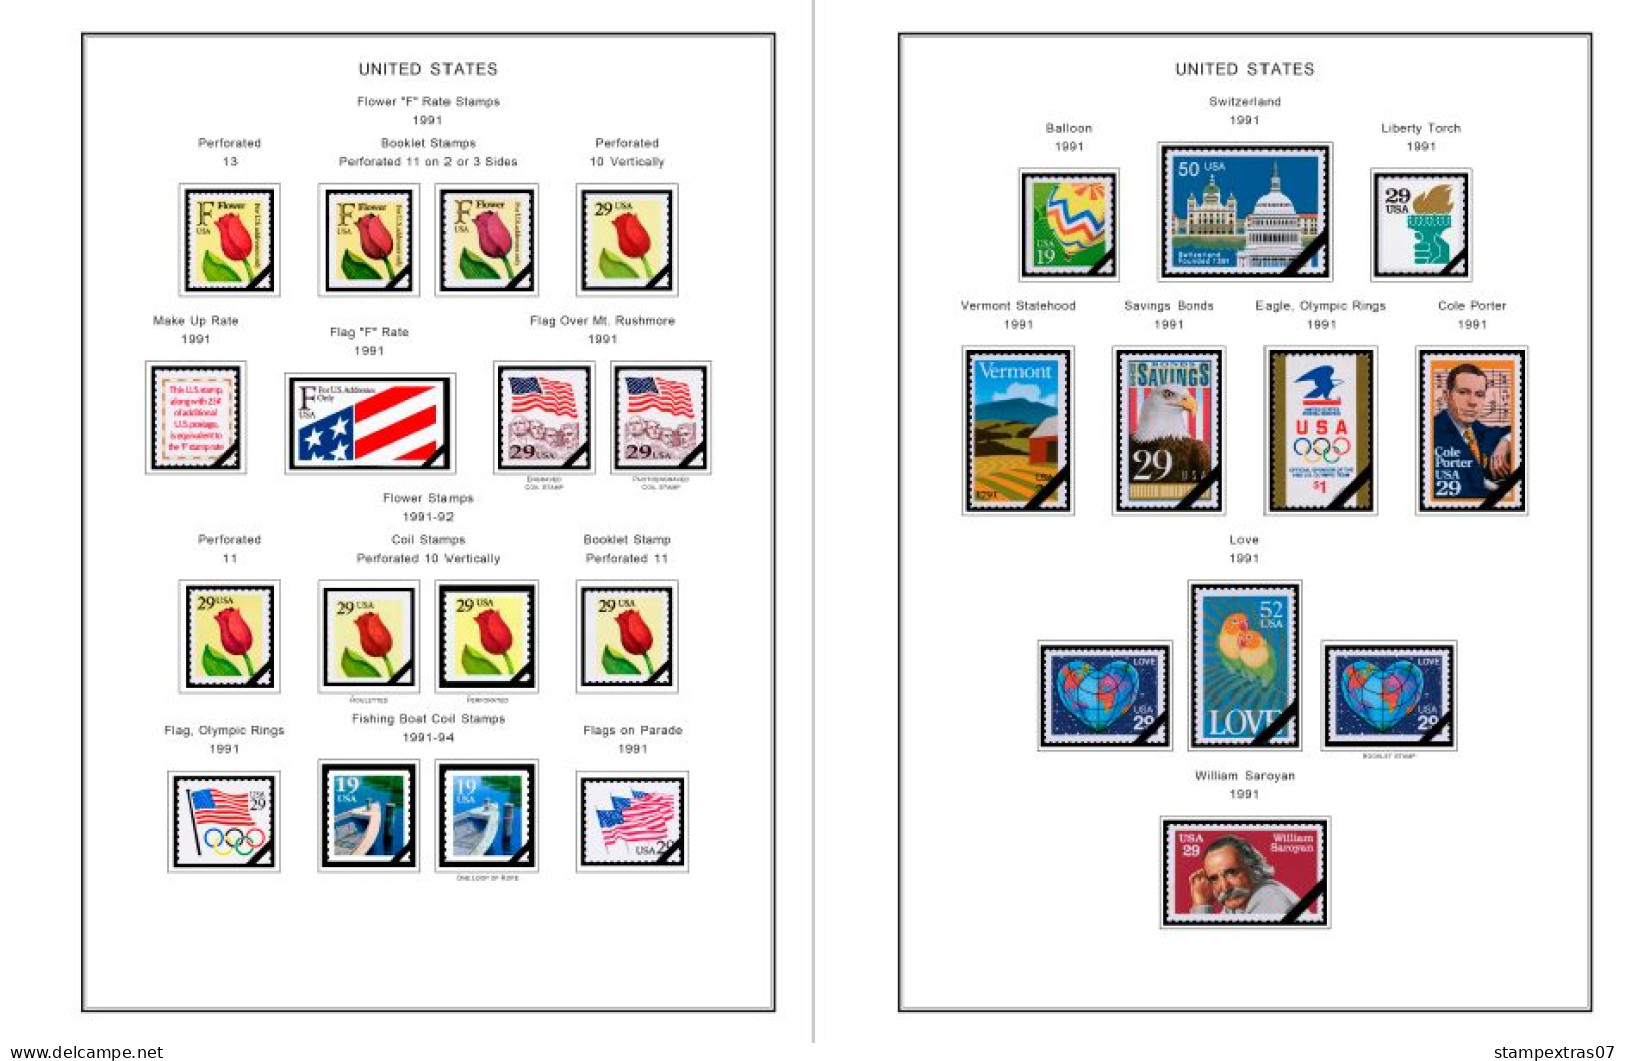 COLOR PRINTED USA 1991-1999 STAMP ALBUM PAGES (143 Illustrated Pages) >> FEUILLES ALBUM - Pre-printed Pages